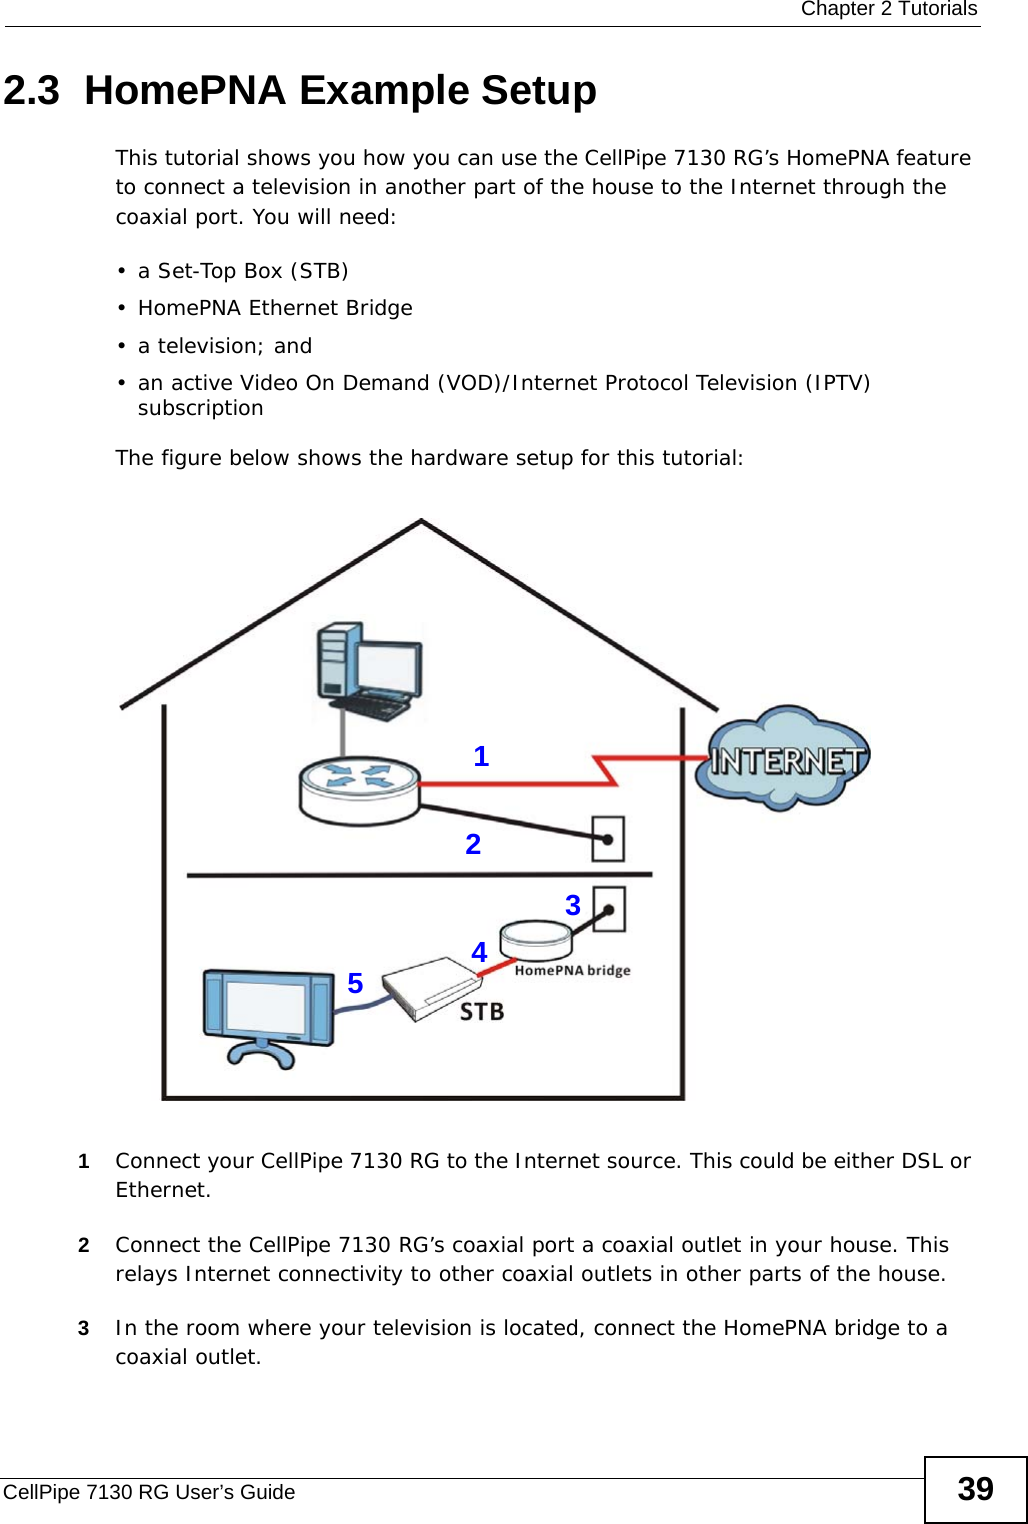  Chapter 2 TutorialsCellPipe 7130 RG User’s Guide 392.3  HomePNA Example SetupThis tutorial shows you how you can use the CellPipe 7130 RG’s HomePNA feature to connect a television in another part of the house to the Internet through the coaxial port. You will need:•a Set-Top Box (STB)• HomePNA Ethernet Bridge•a television; and • an active Video On Demand (VOD)/Internet Protocol Television (IPTV) subscription The figure below shows the hardware setup for this tutorial:  1Connect your CellPipe 7130 RG to the Internet source. This could be either DSL or Ethernet. 2Connect the CellPipe 7130 RG’s coaxial port a coaxial outlet in your house. This relays Internet connectivity to other coaxial outlets in other parts of the house. 3In the room where your television is located, connect the HomePNA bridge to a coaxial outlet.12345